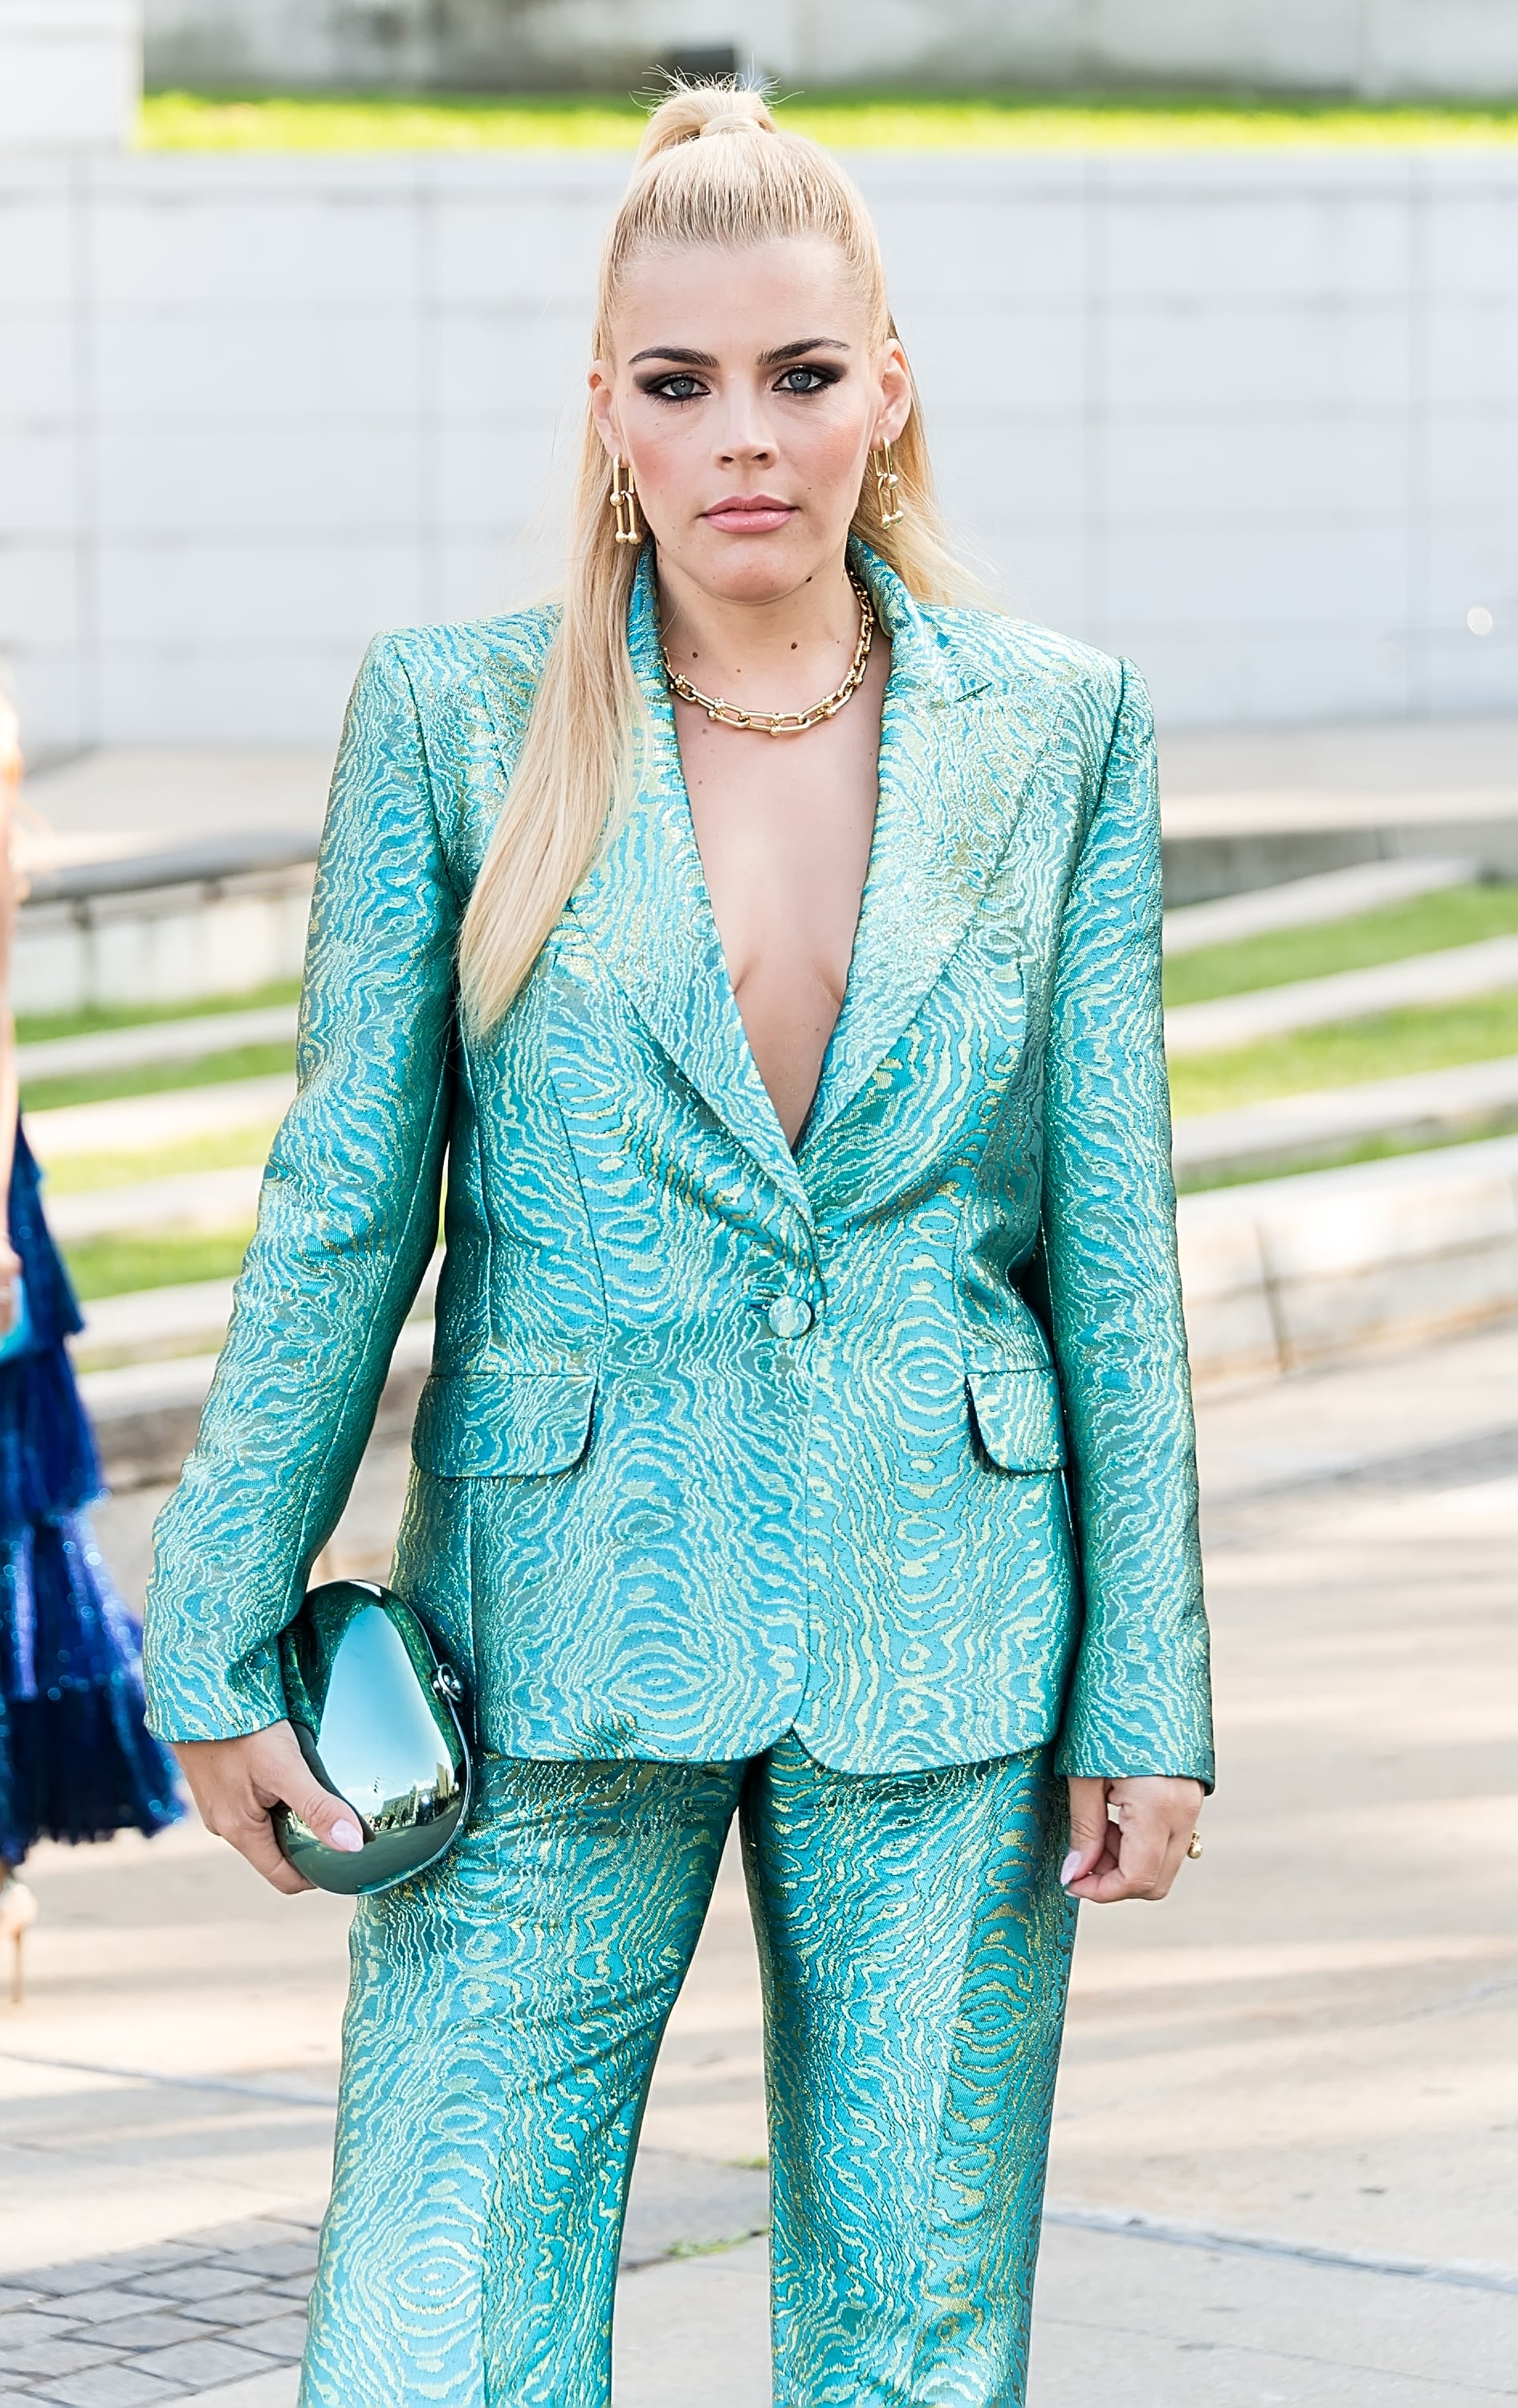 NEW YORK, NY - JUNE 04:  Actress Busy Philipps is seen arriving to the 2018 CFDA Fashion Awards at Brooklyn Museum on June 4, 2018 in New York City.  (Photo by Gilbert Carrasquillo/GC Images)